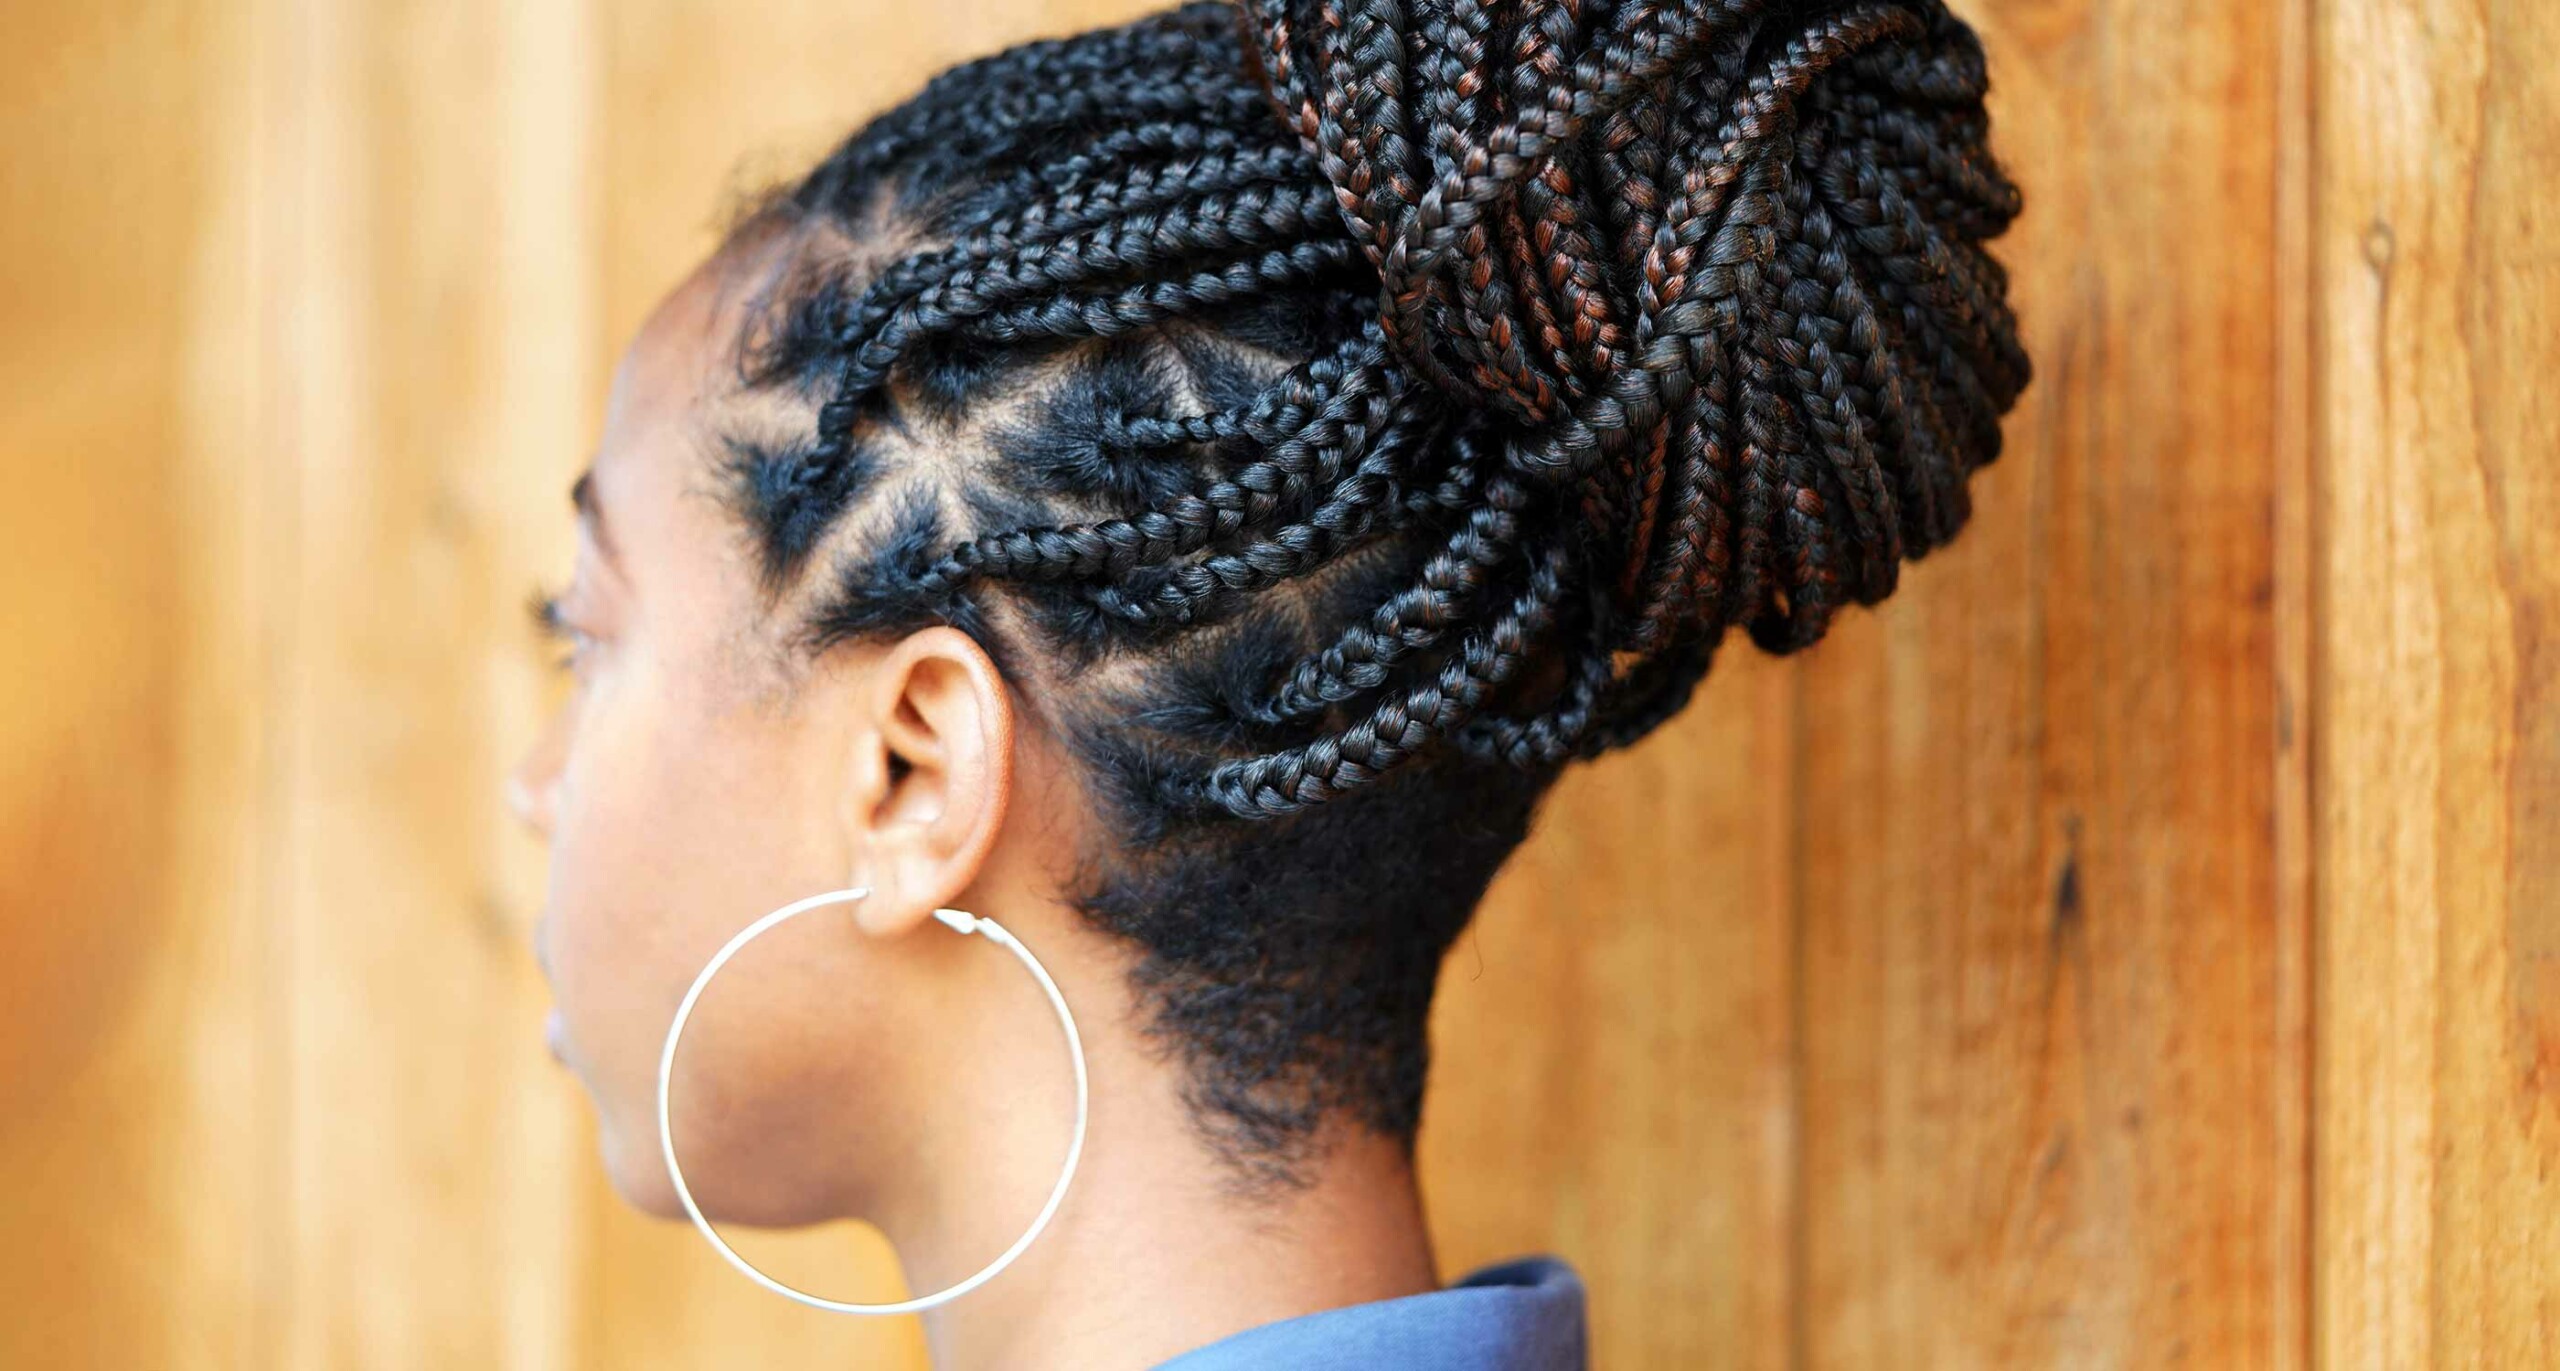 back view of person wearing large hoop earrings and box braids in a bun